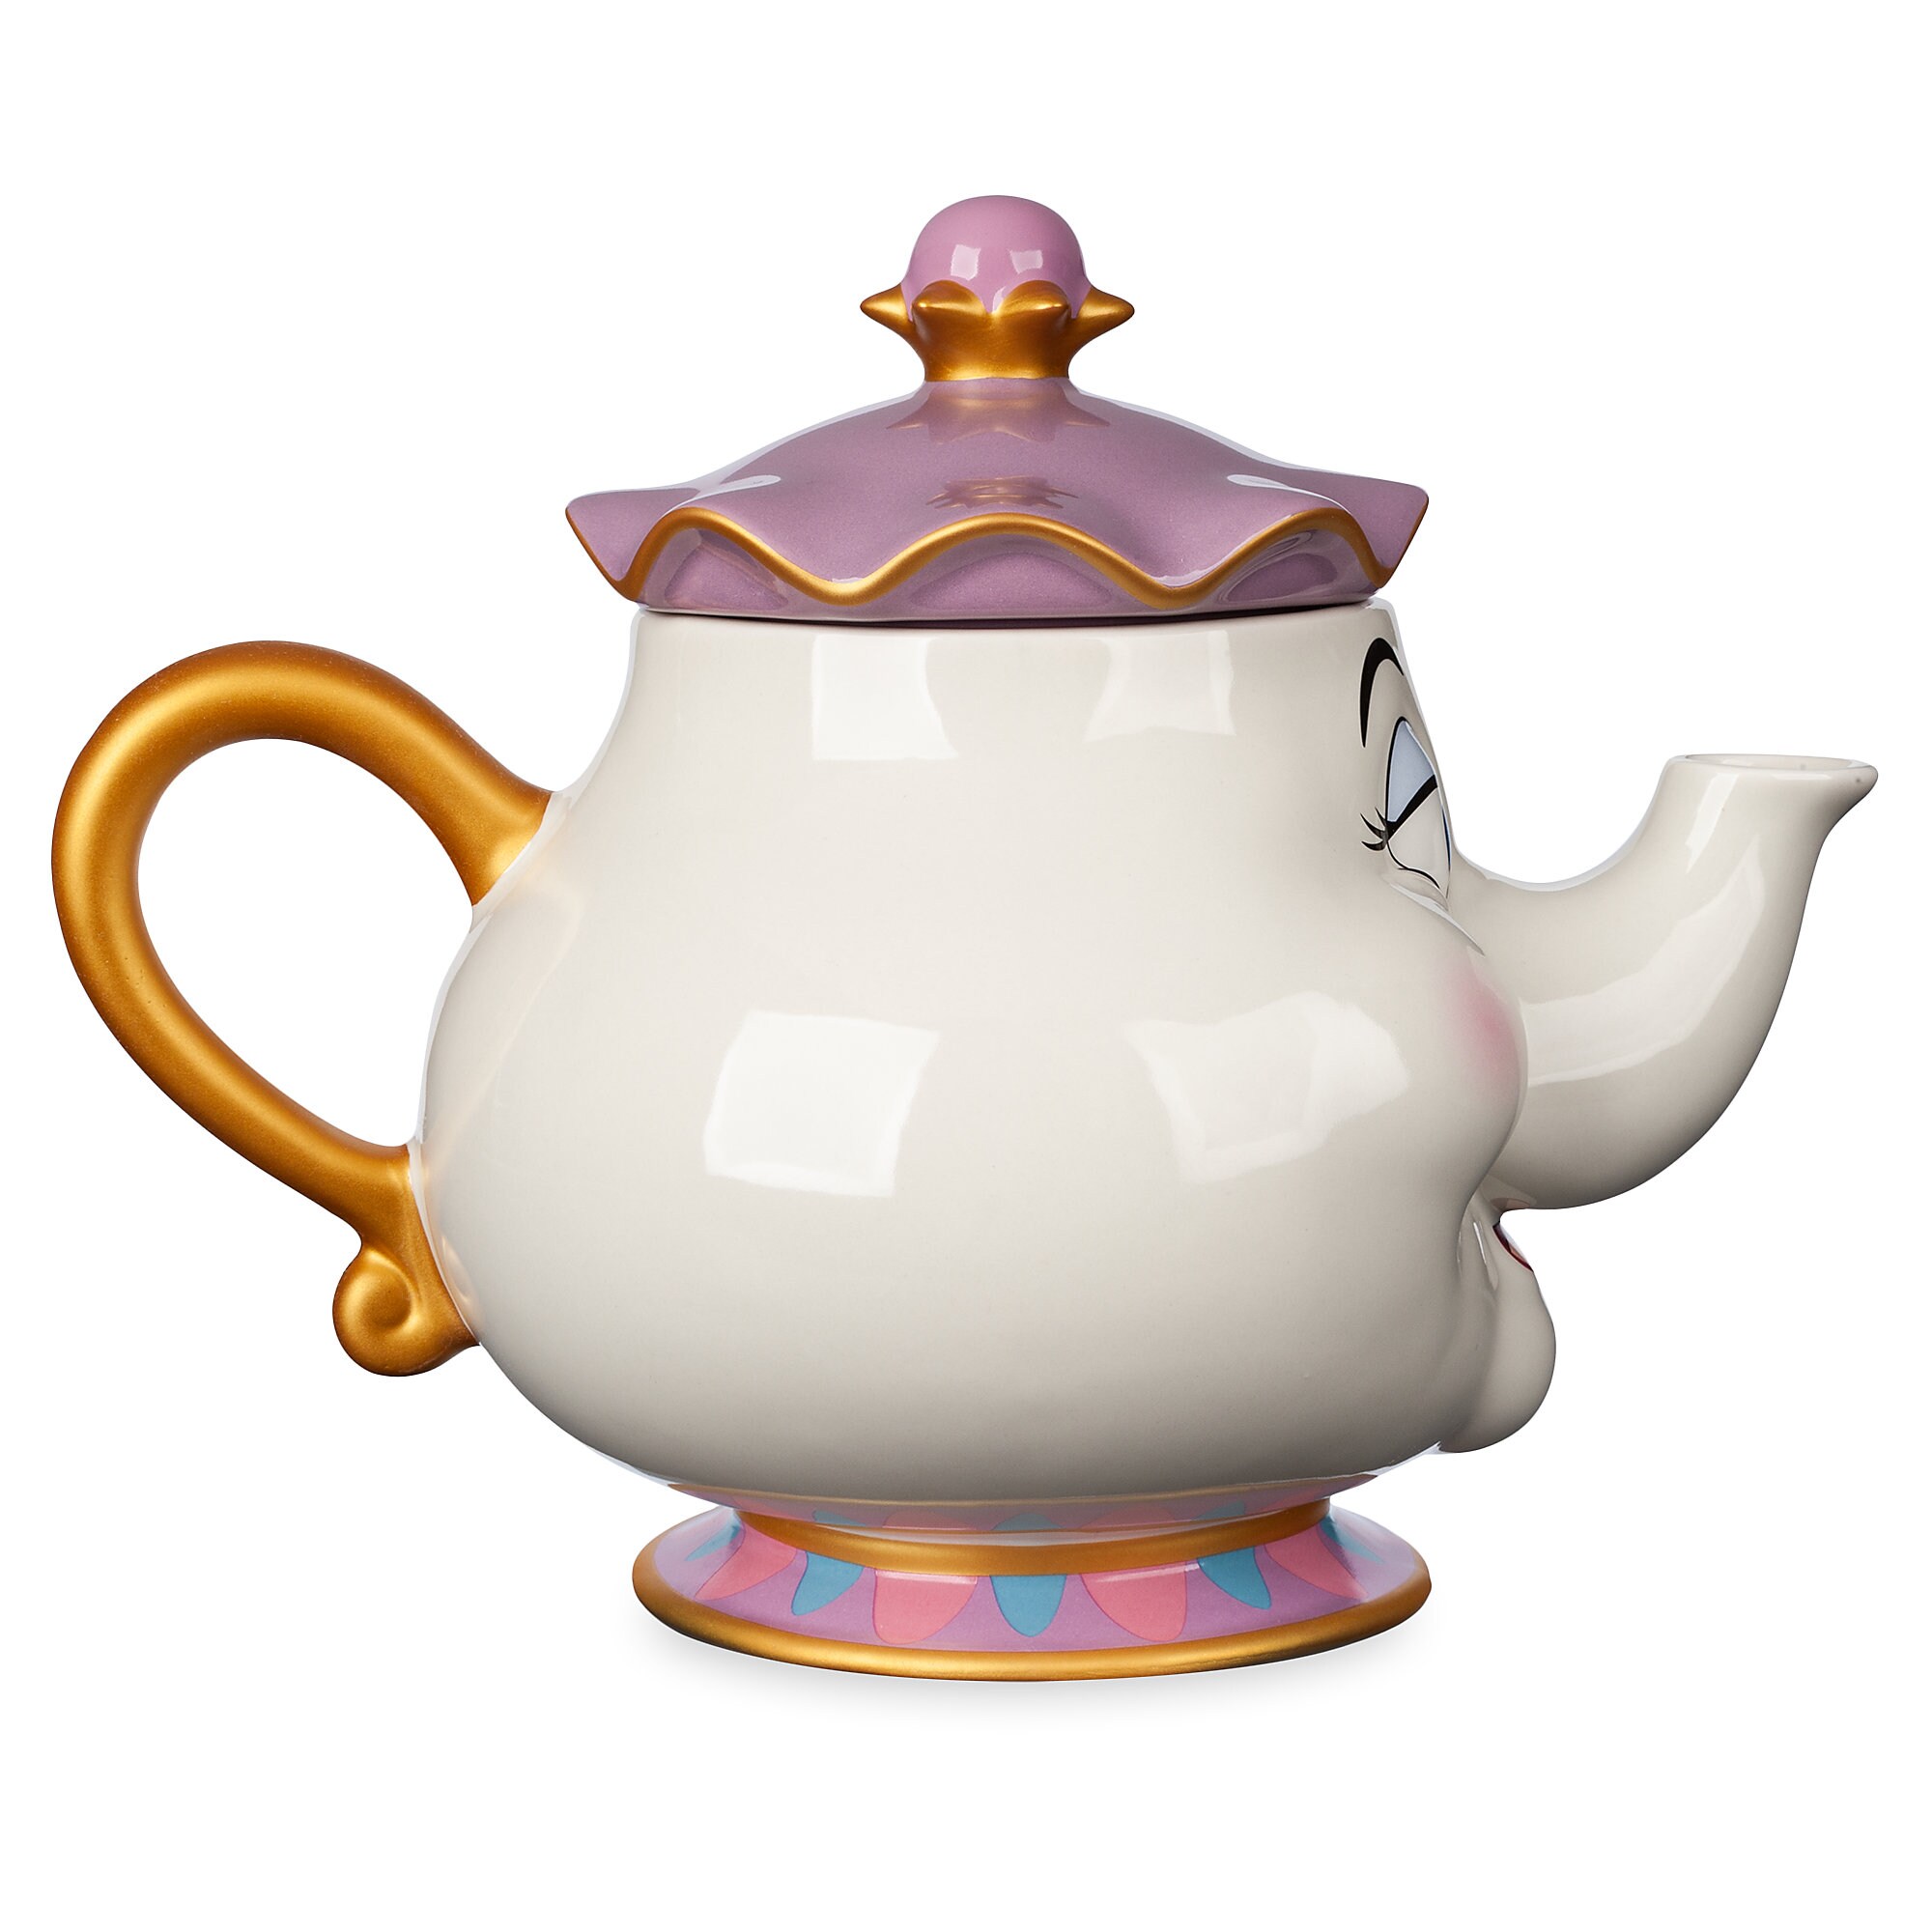 Mrs. Potts Teapot - Beauty and the Beast was released today – Dis ...